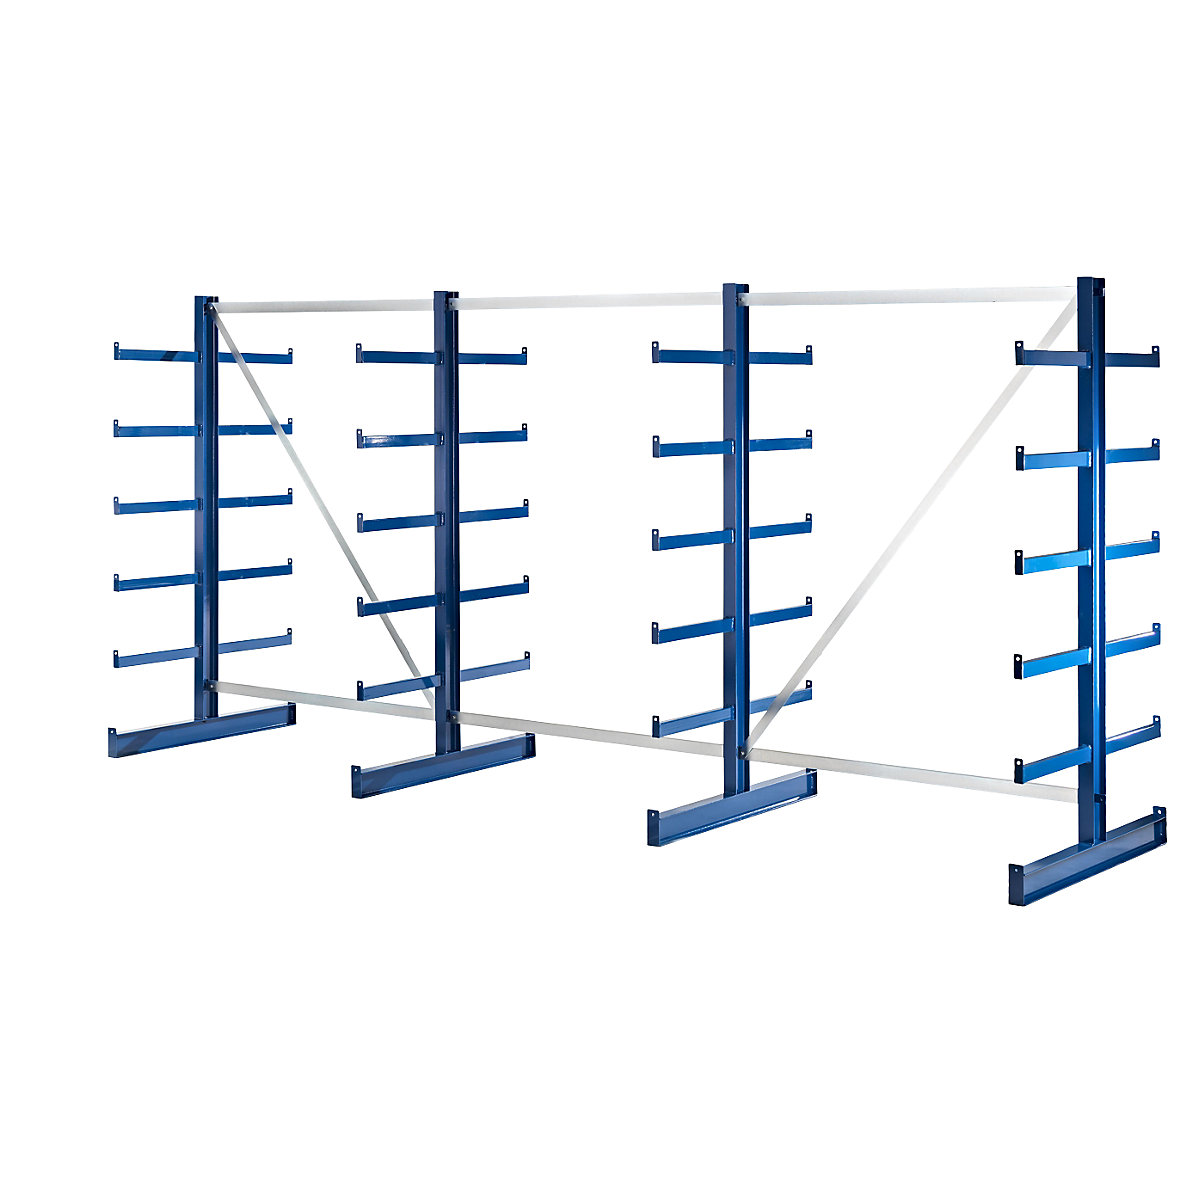 Cantilever racking unit with identical cantilever arm length – eurokraft pro, shelf unit length 4050 mm, double sided, gentian blue-3